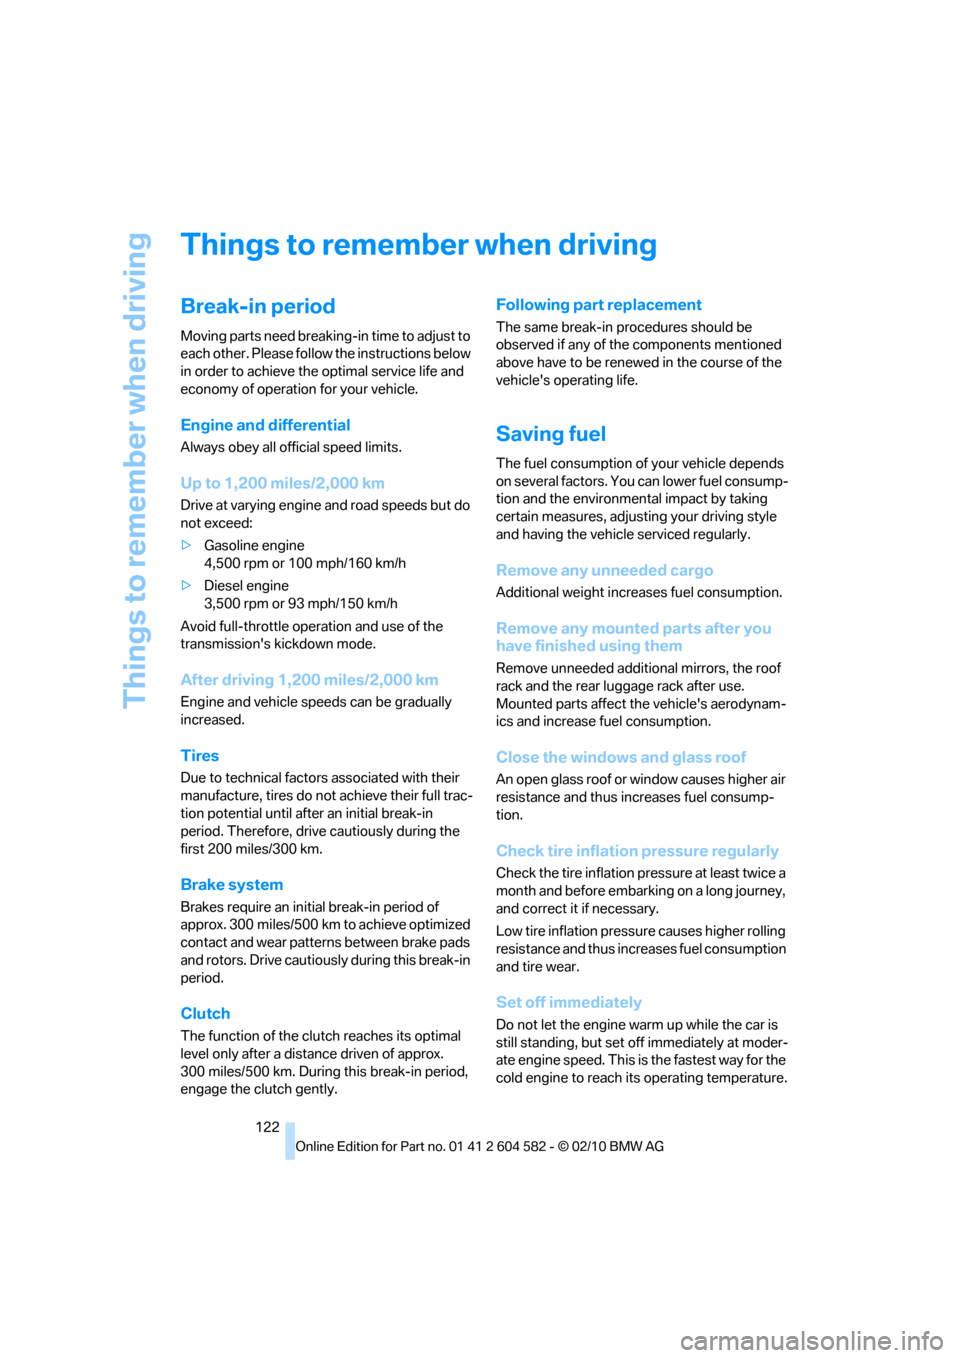 BMW 323I 2011 E90 Owners Manual Things to remember when driving
122
Things to remember when driving
Break-in period
Moving parts need breaking-in time to adjust to 
each other. Please follow the instructions below 
in order to achie